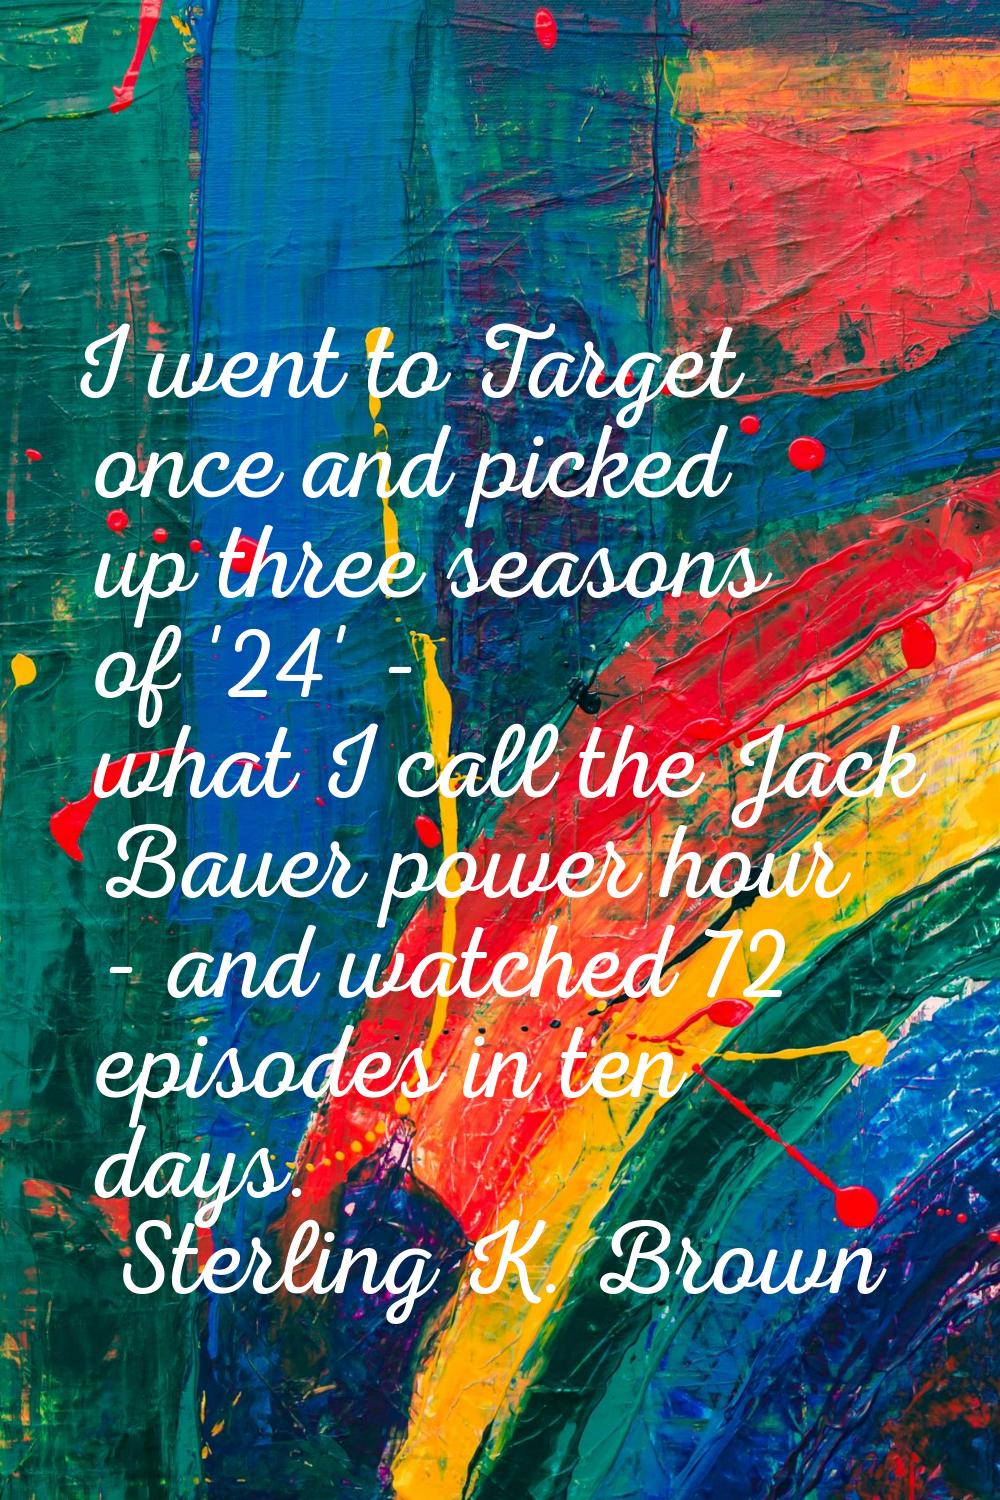 I went to Target once and picked up three seasons of '24' - what I call the Jack Bauer power hour -